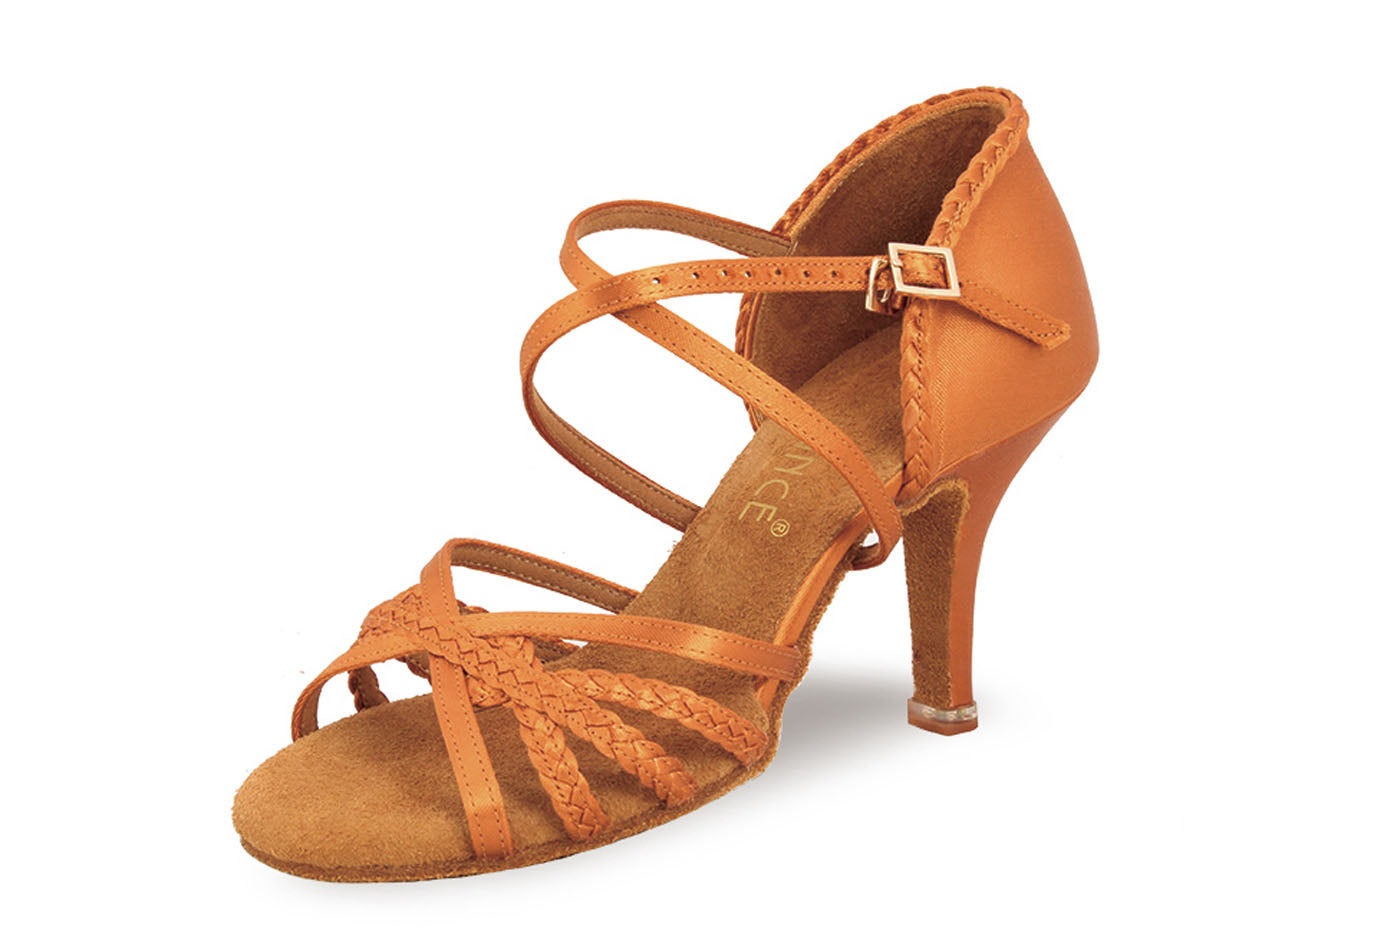 BD Dance 2703 Ladies Latin Dance Shoe with Cross Ankle Strap and Braided Strap Detail